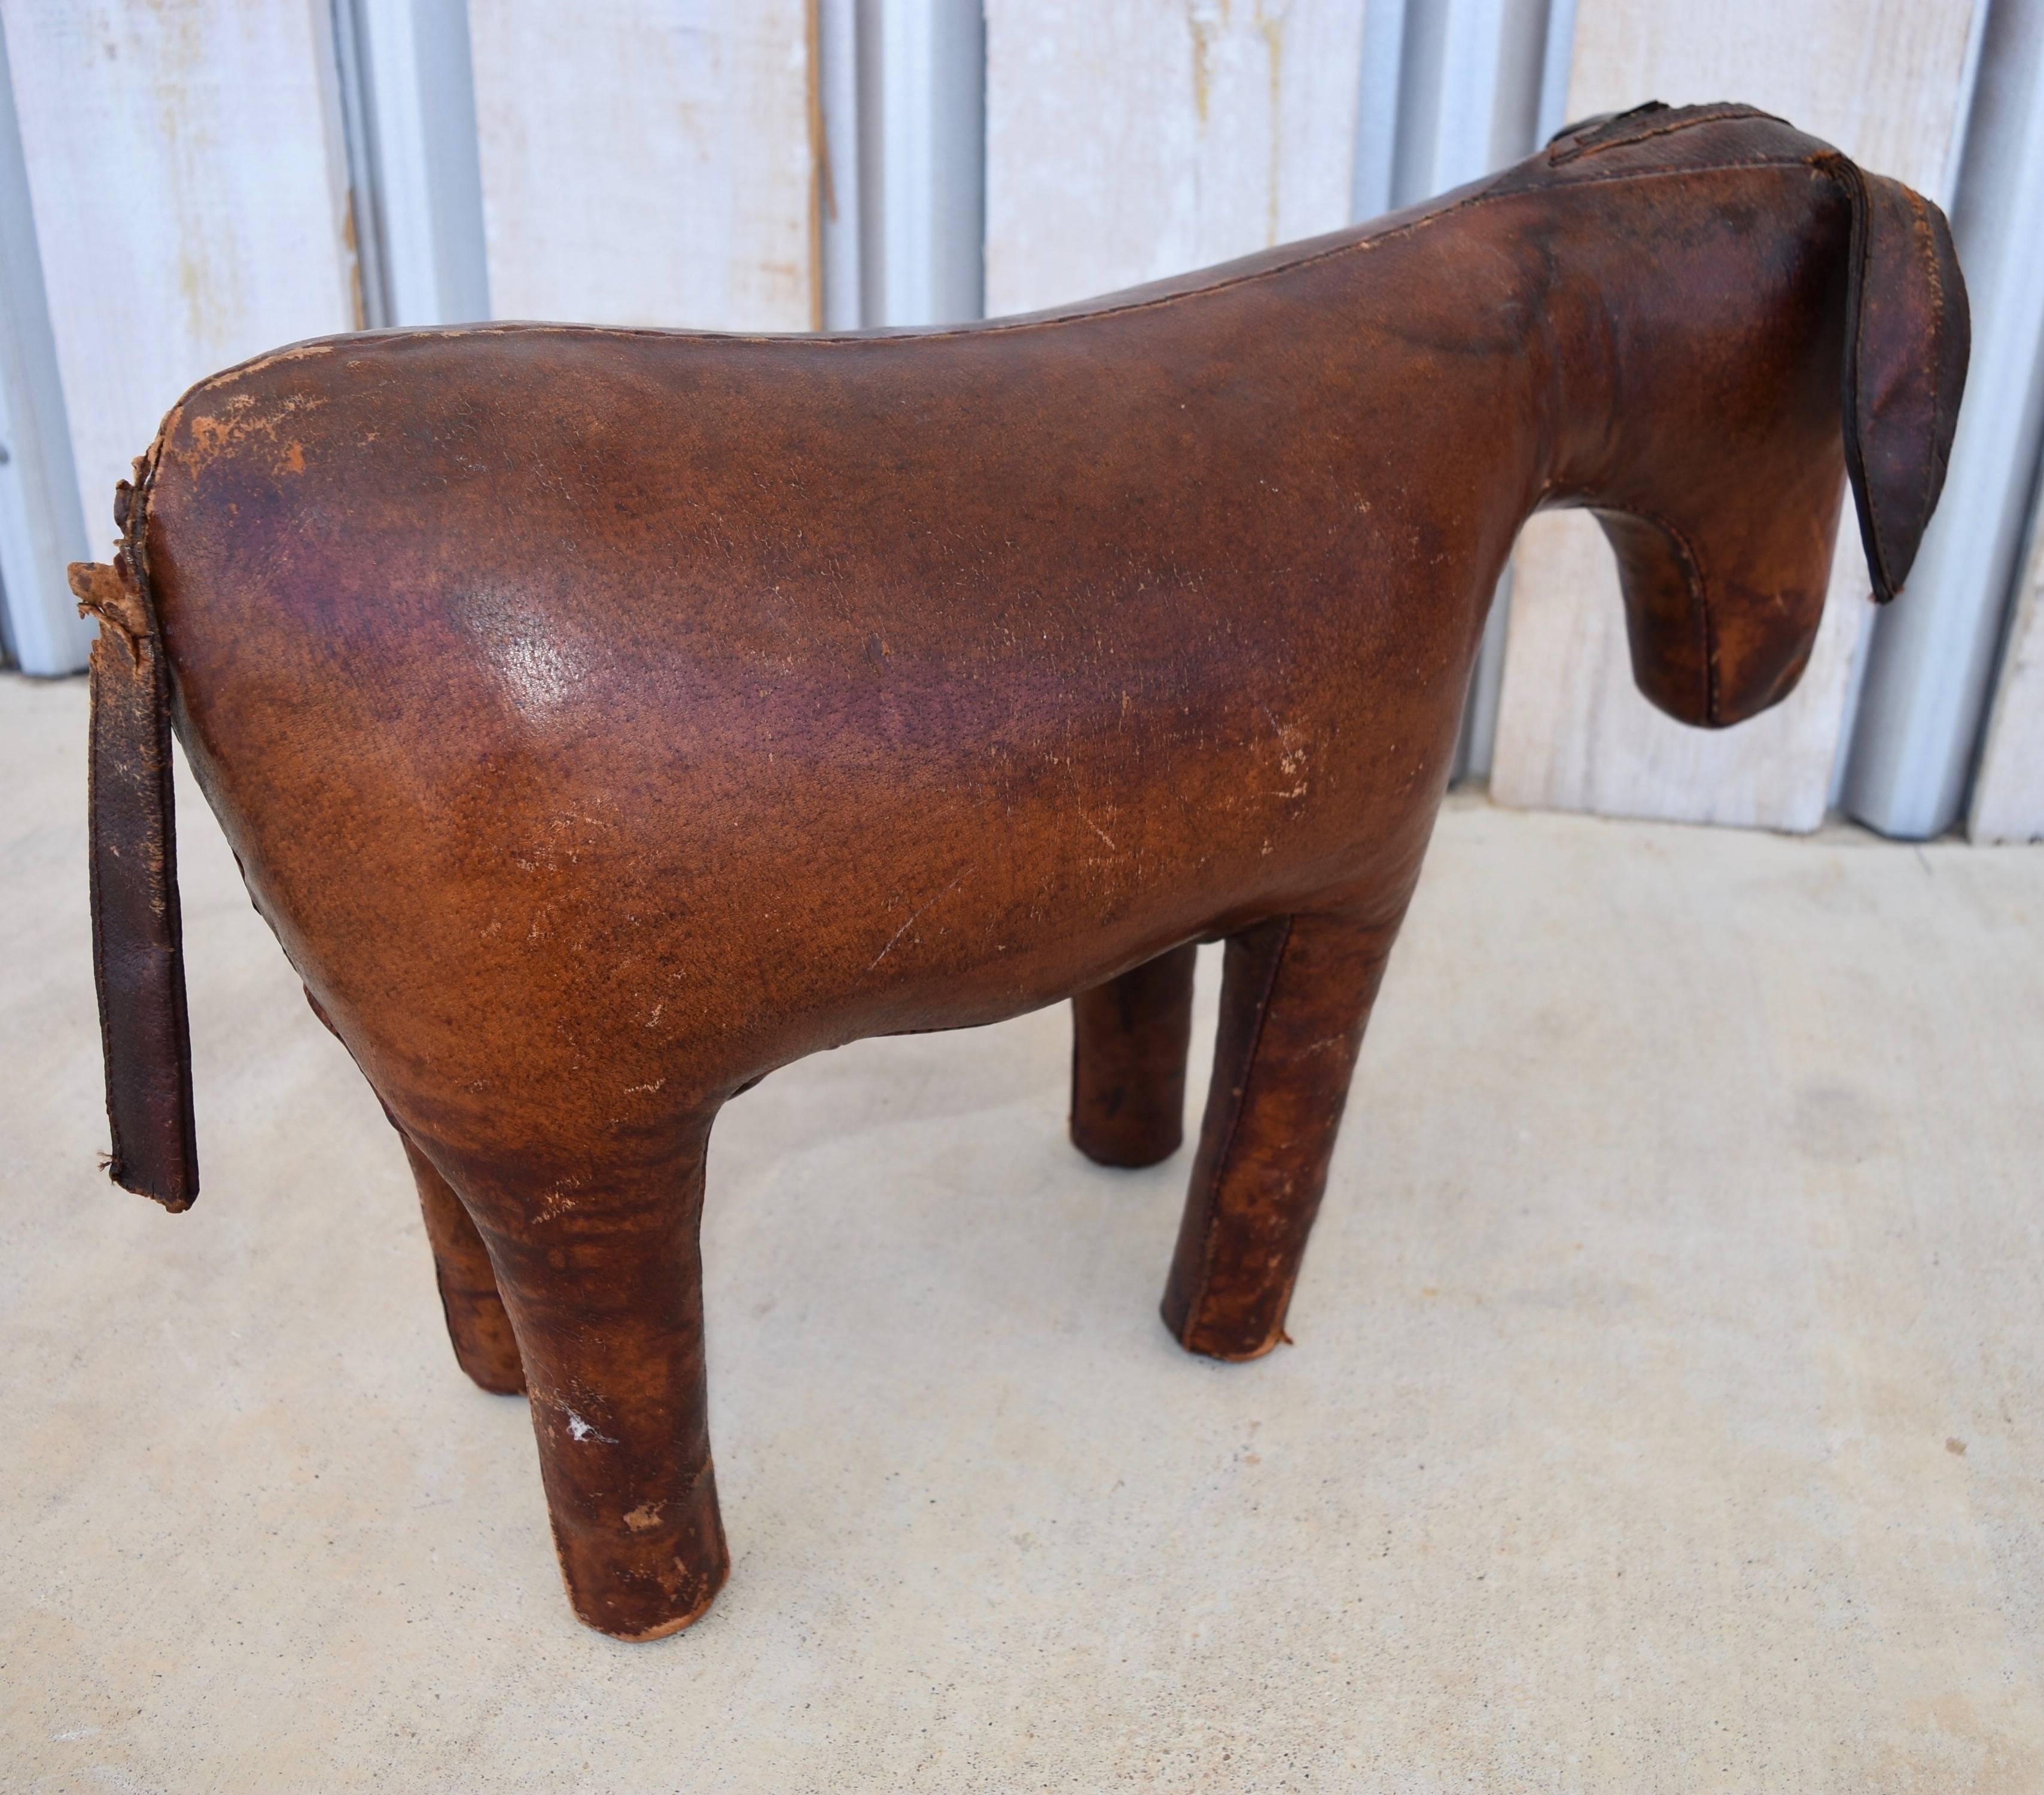 Hand-Crafted 1960s-1970s Leather Donkey Footstool by Dimitri Omersa for Abercrombie & Fitch